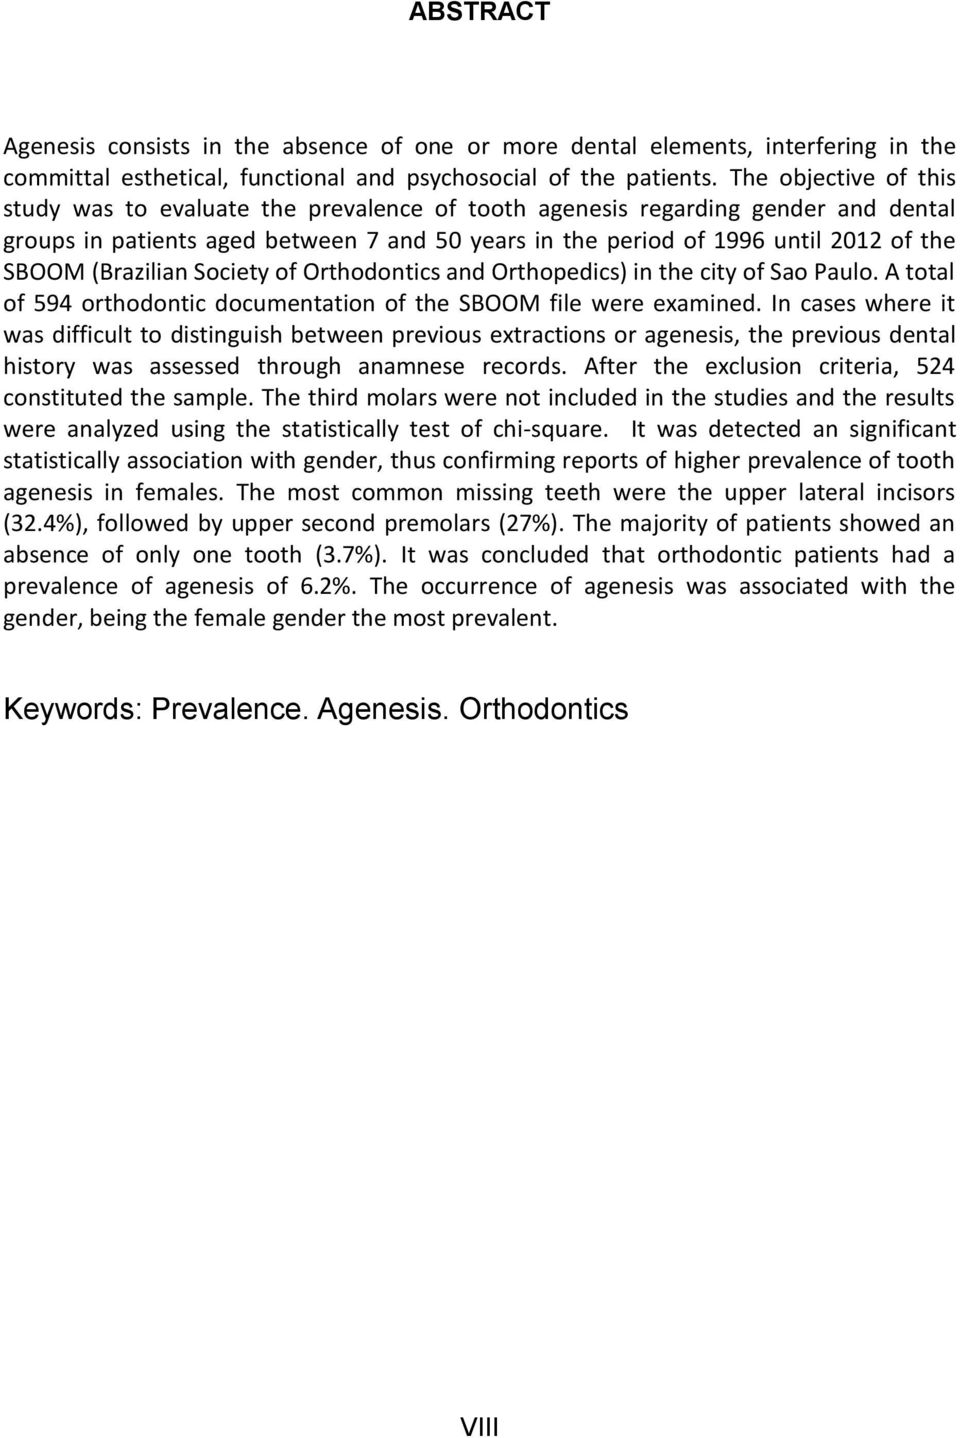 (Brazilian Society of Orthodontics and Orthopedics) in the city of Sao Paulo. A total of 594 orthodontic documentation of the SBOOM file were examined.